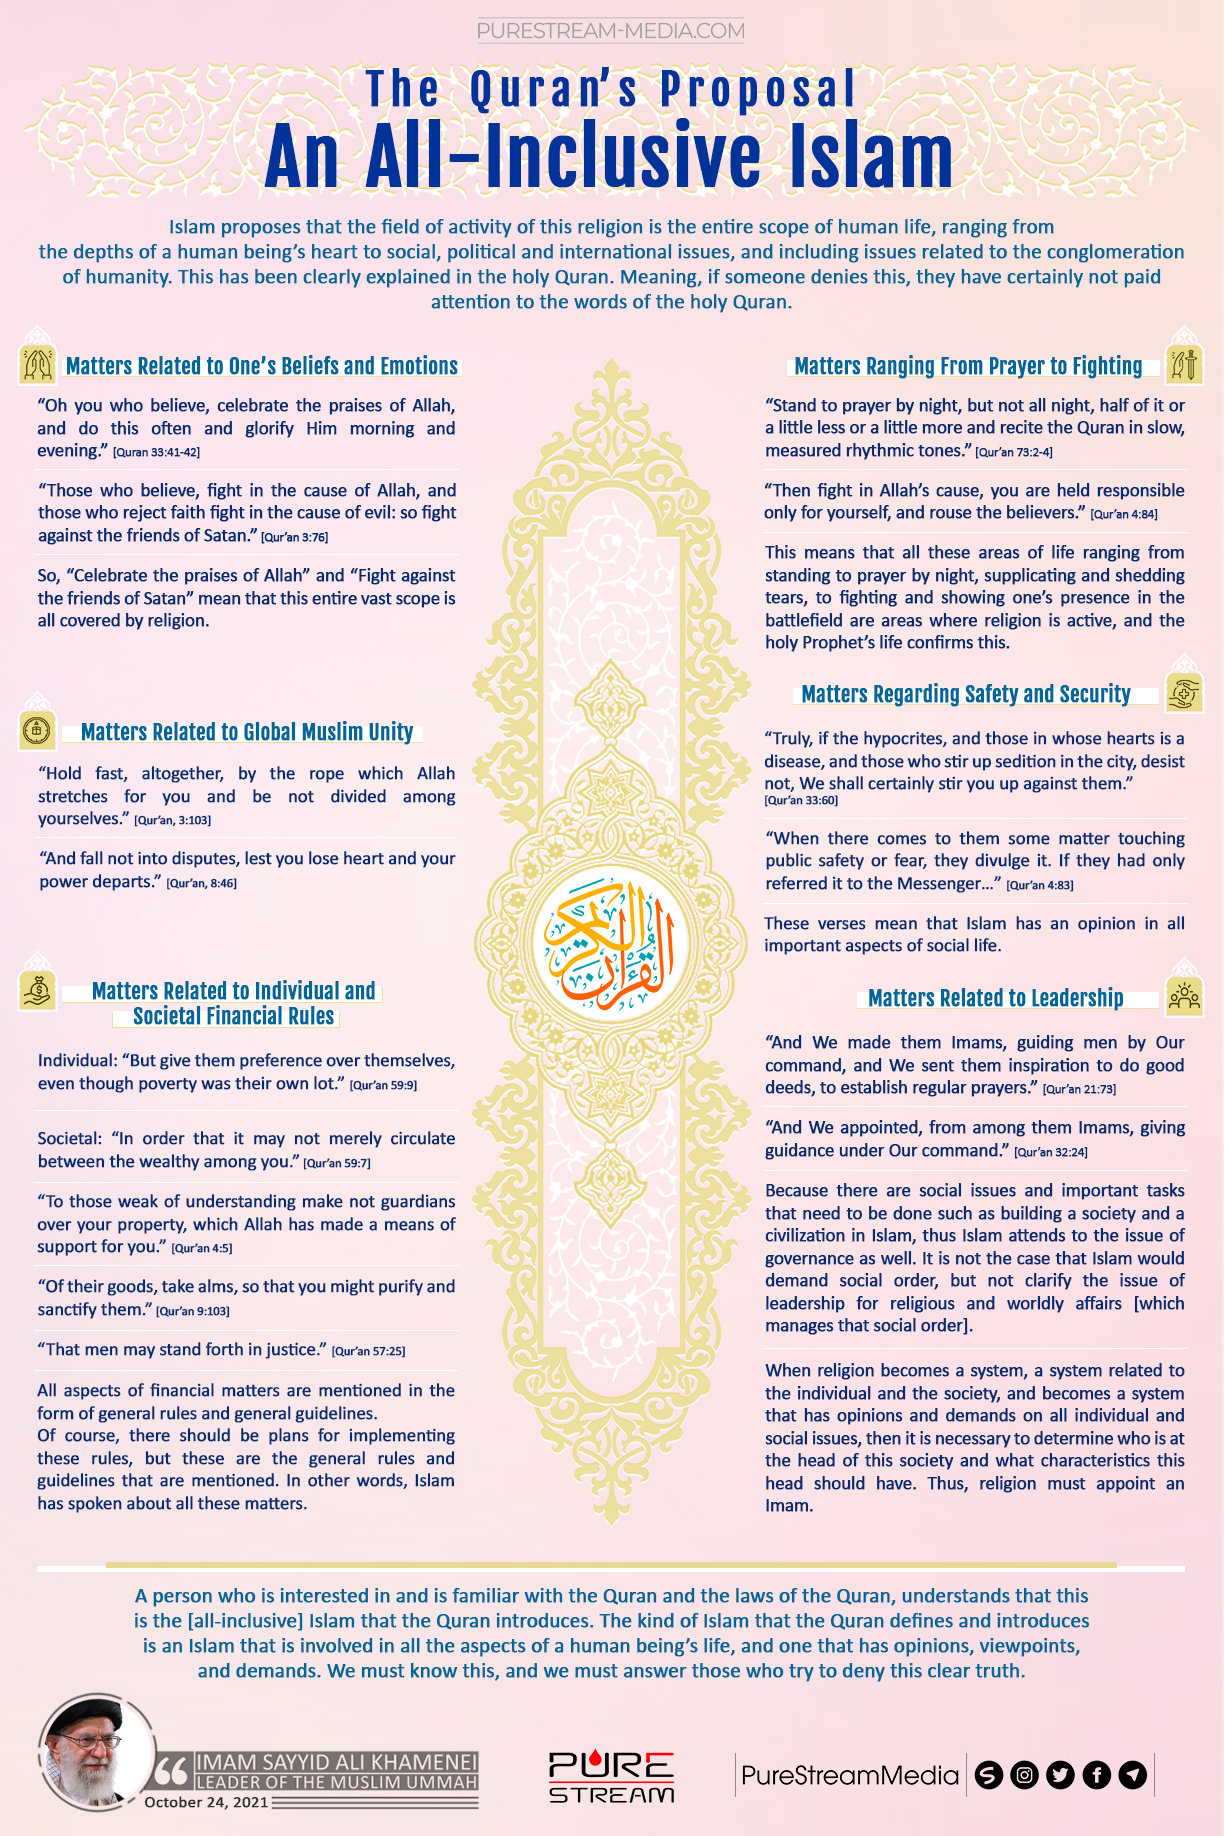 The Quran’s Proposal: An All-Inclusive Islam | Infographic